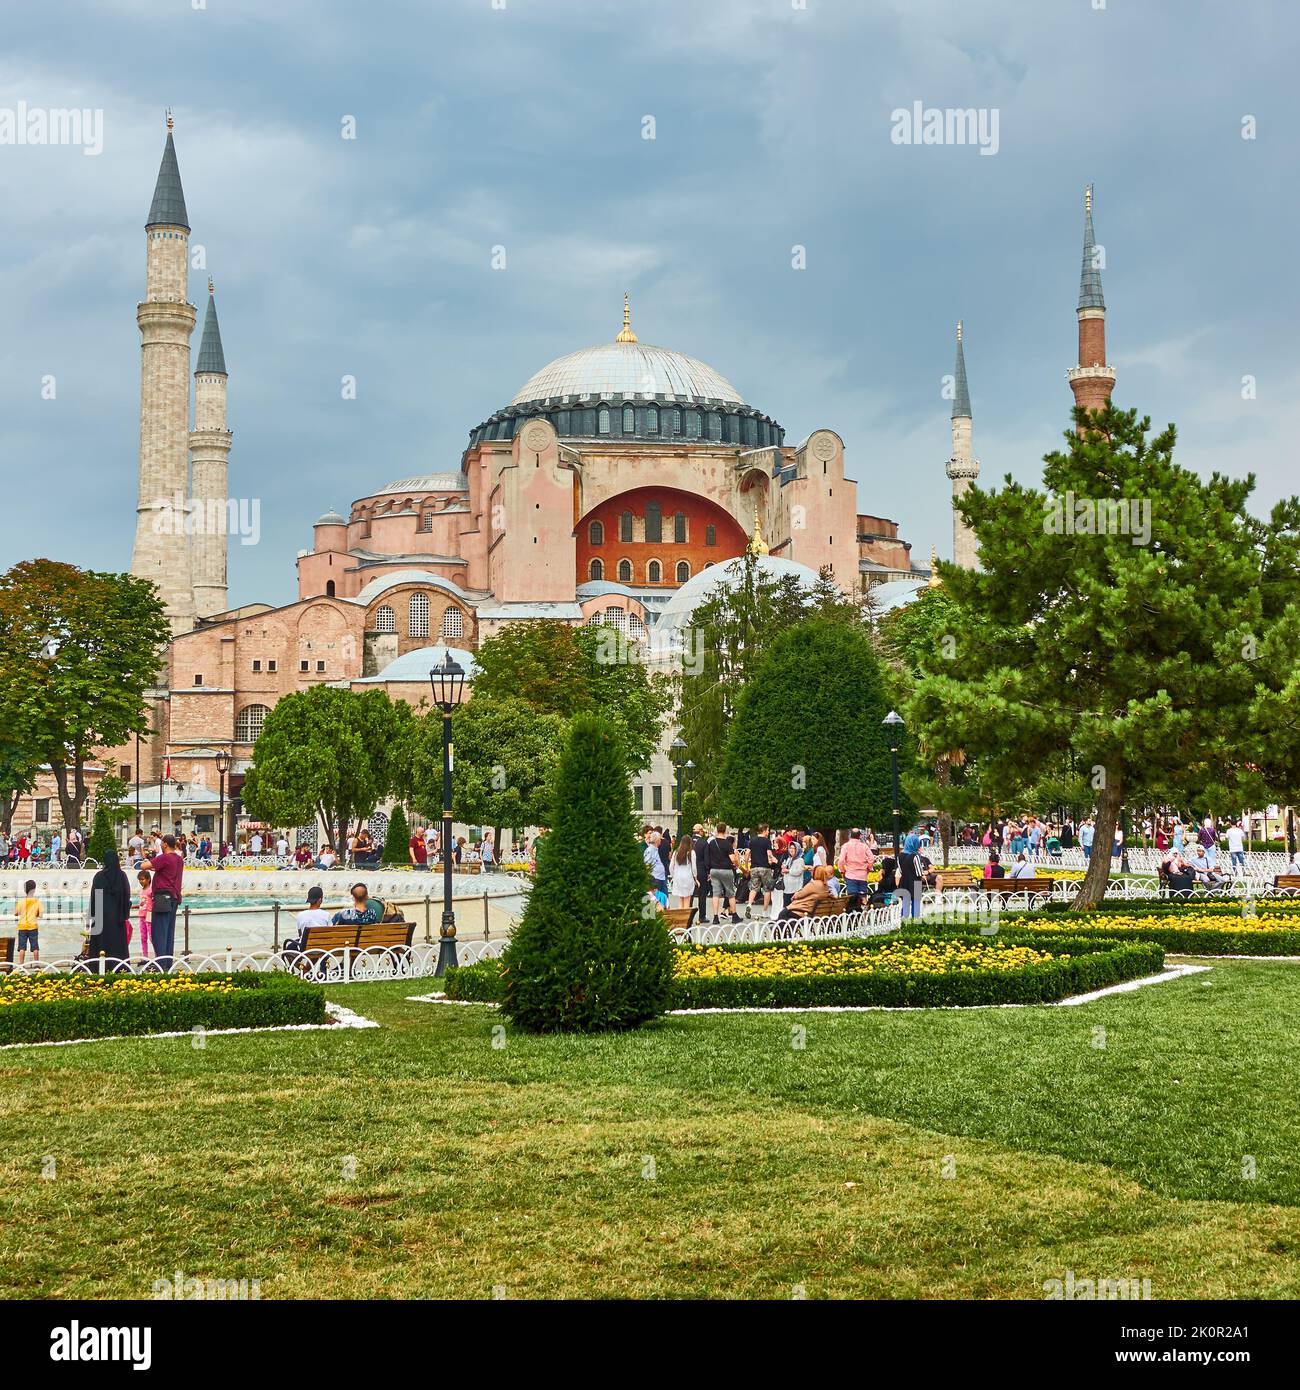 Istanbul, Turkey - July 18, 2018: View of Istanbul with The Hagia Sophia mosque and city park in Sultanahmet square Stock Photo